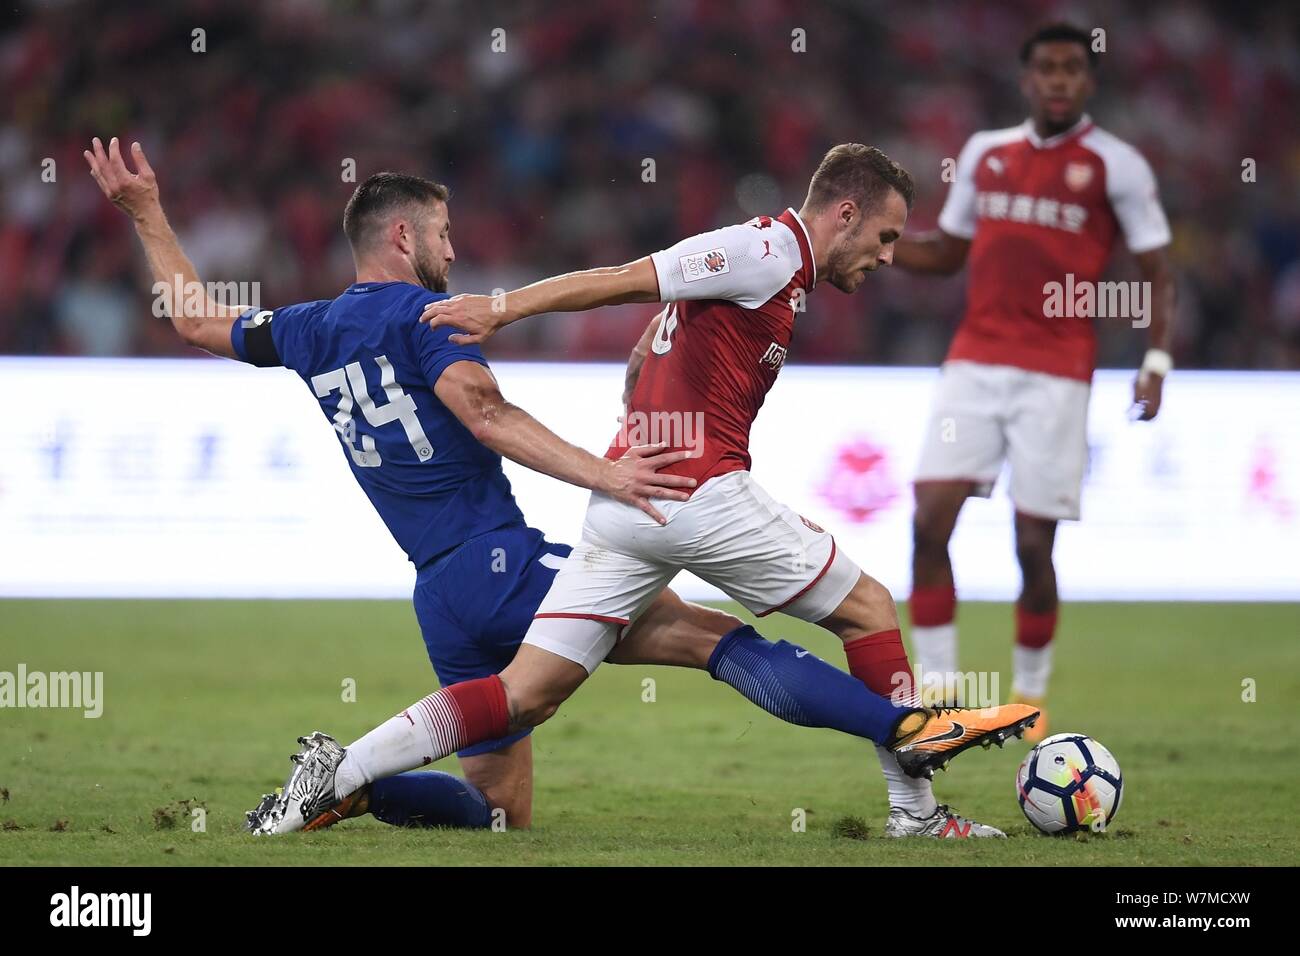 Gary Cahill of Chelsea F.C., left, challenges a player of Arsenal F.C. during the 2017 Beijing Bird's Nest London Derby at the Beijing National Stadiu Stock Photo